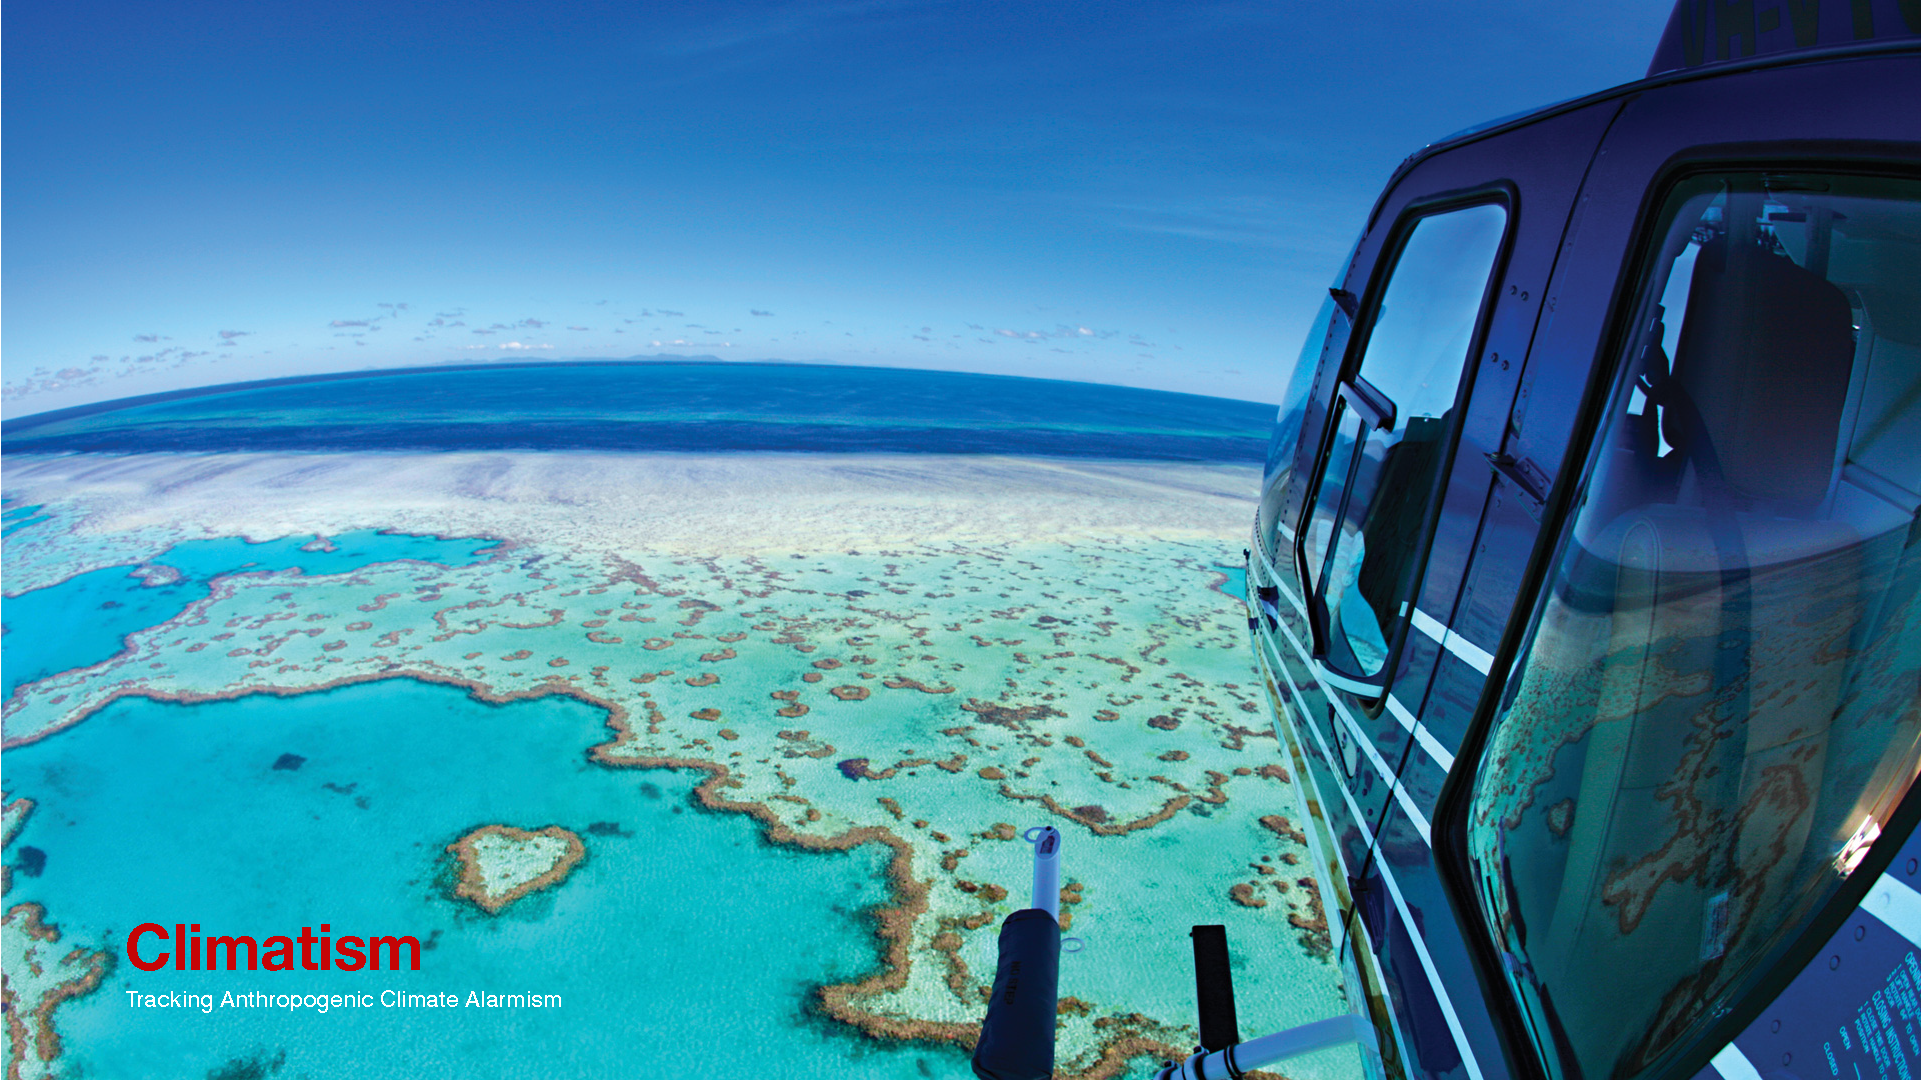 GREAT BARRIER REEF RECOVERY - CLIMATISM